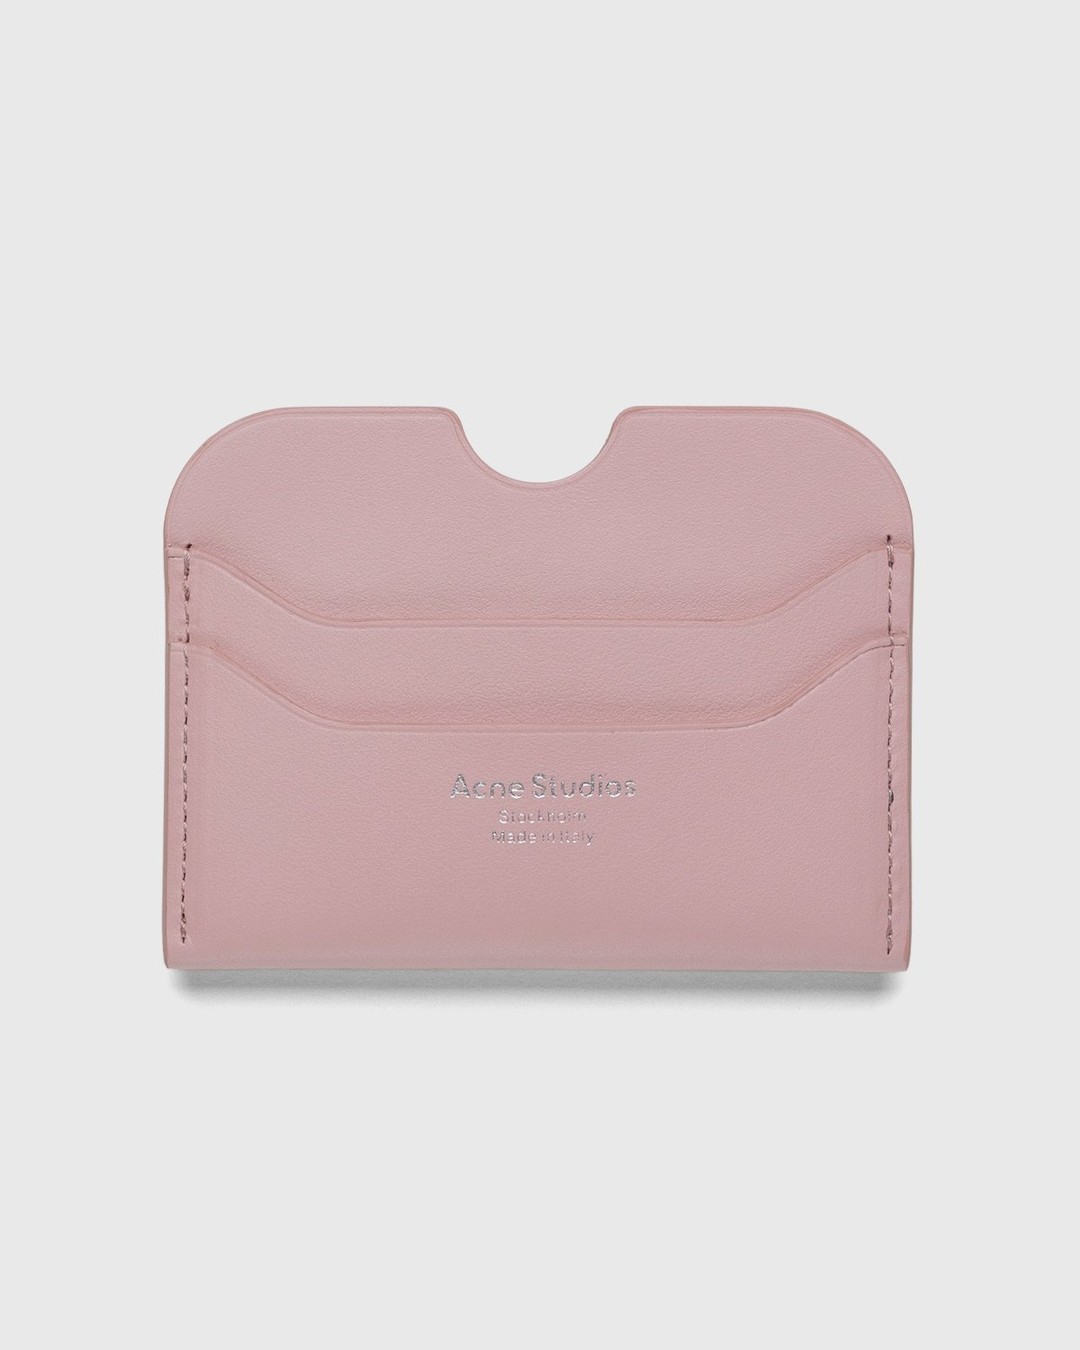 Acne Studios – Leather Card Case Powder Pink - Wallets - Pink - Image 1